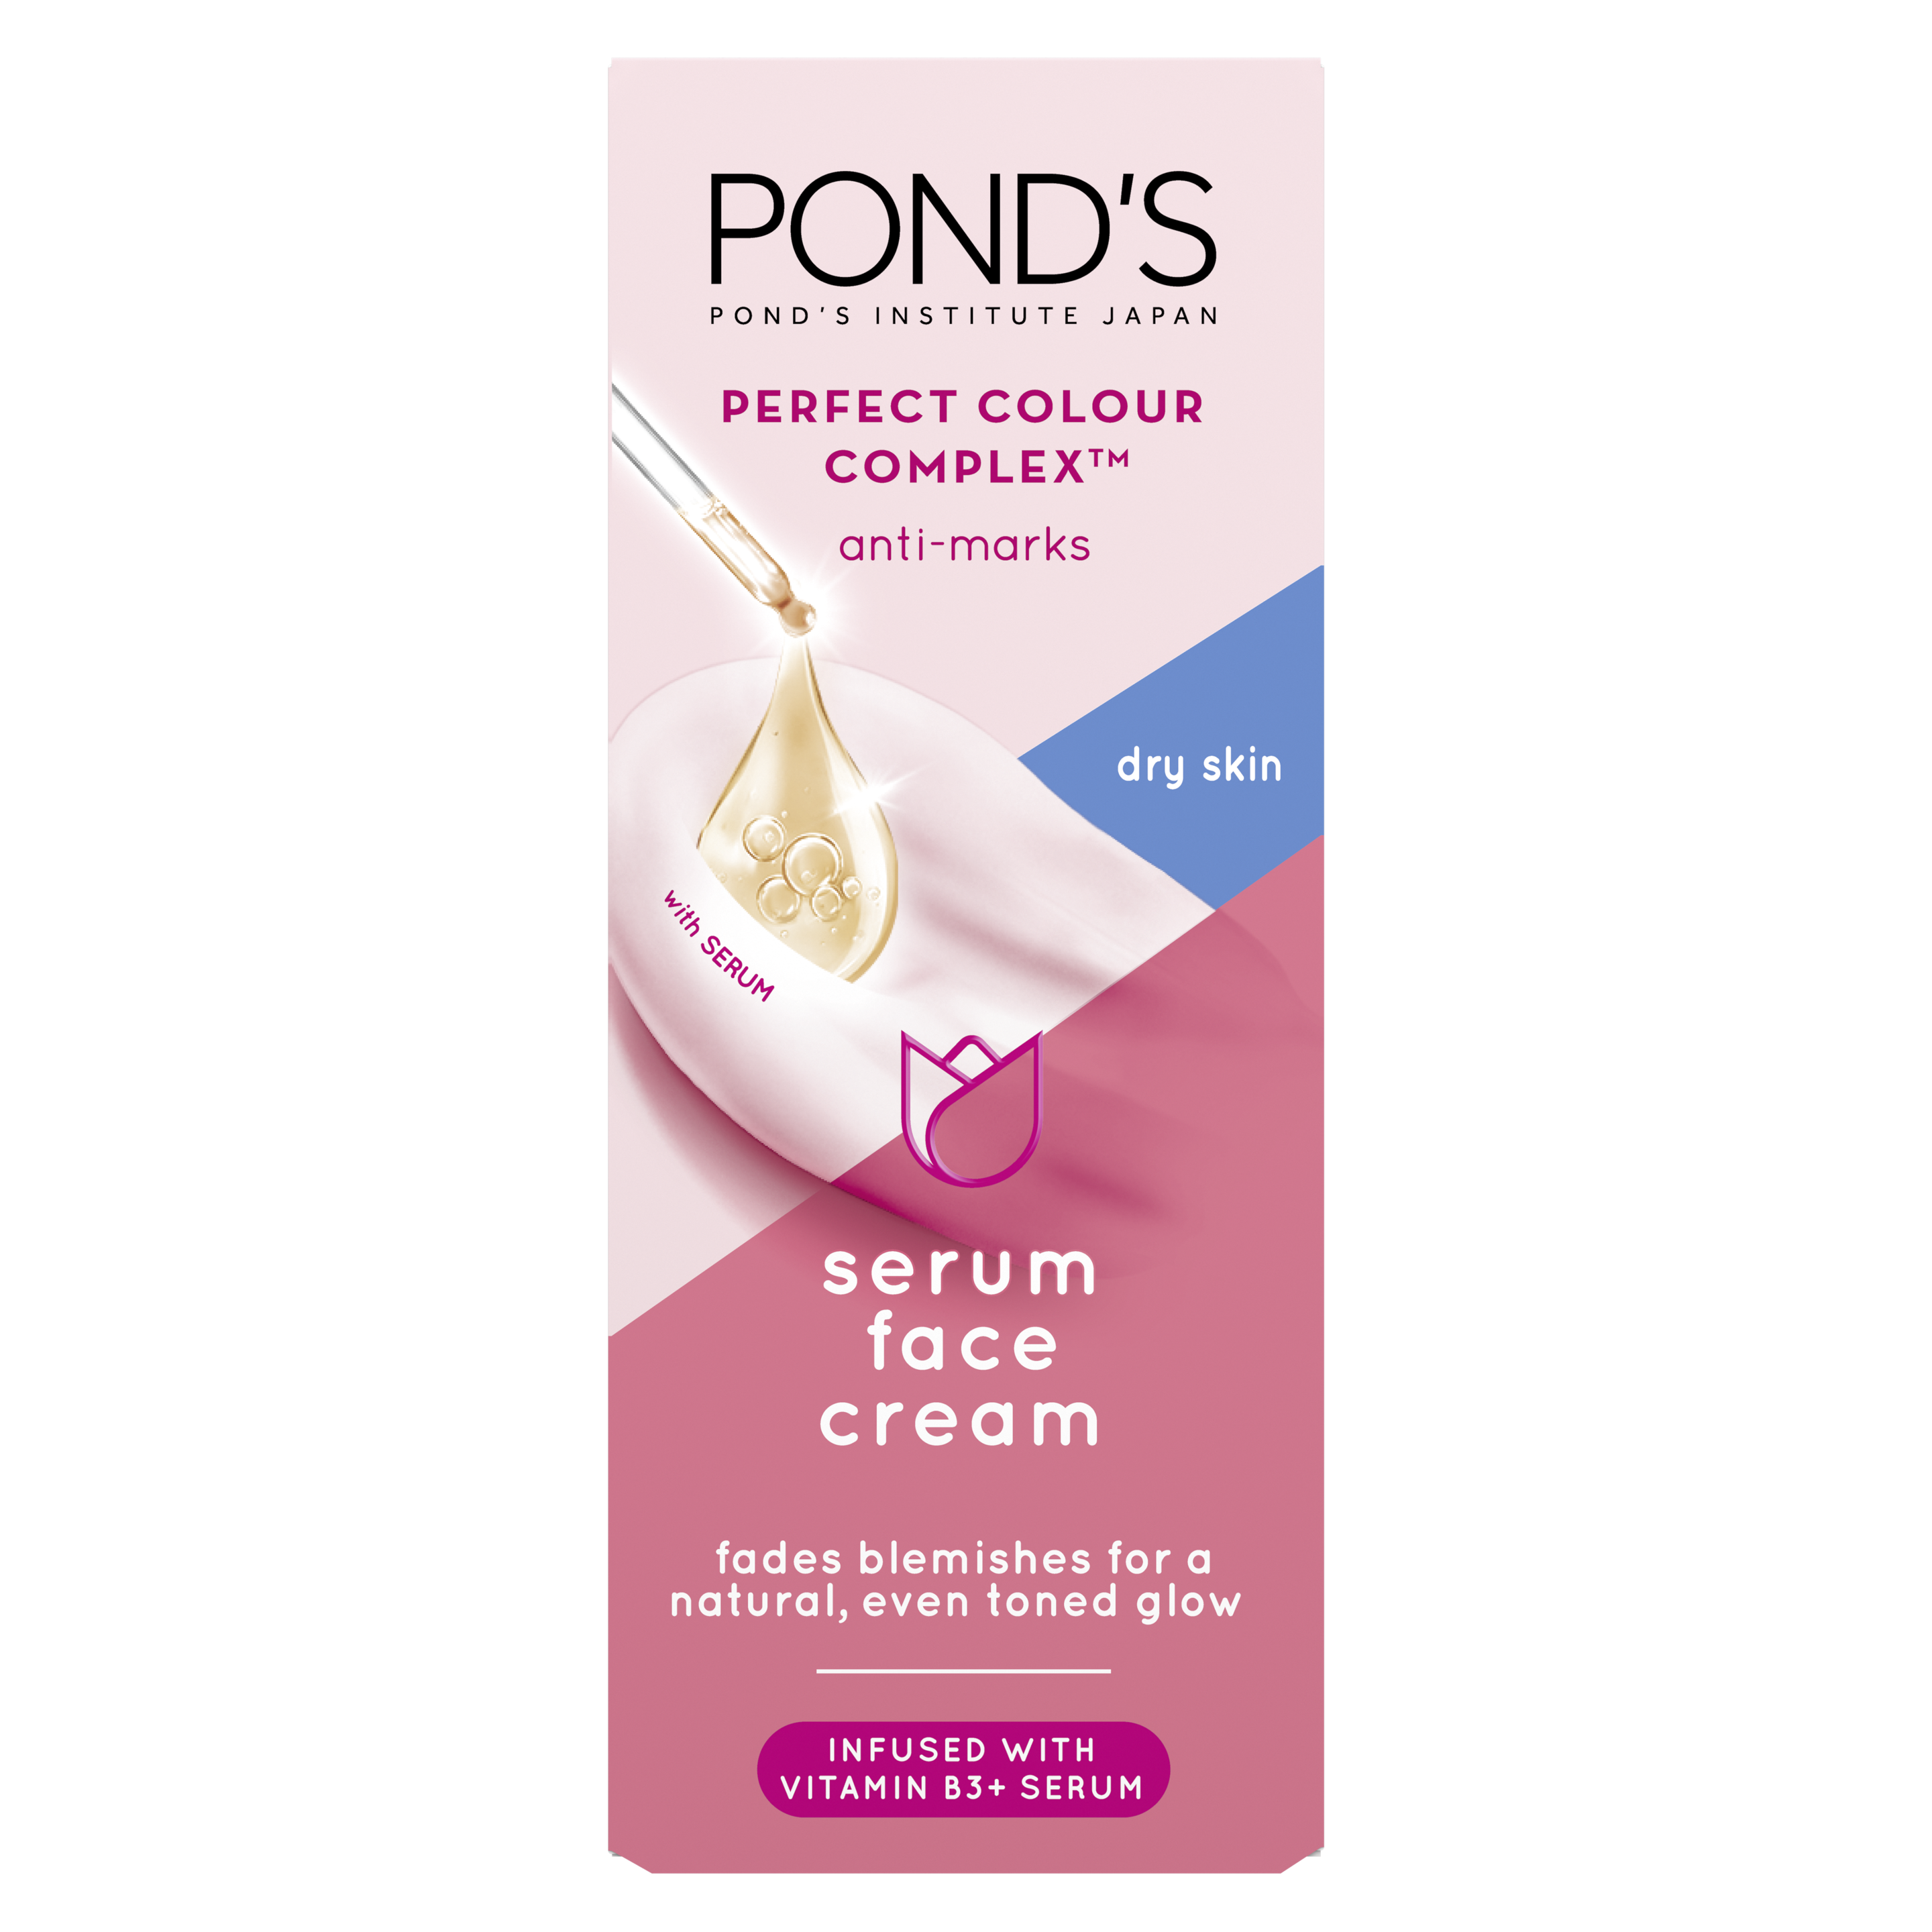 POND'S Perfect Colour Complex Anti Marks Serum Face Cream for Dry Skin